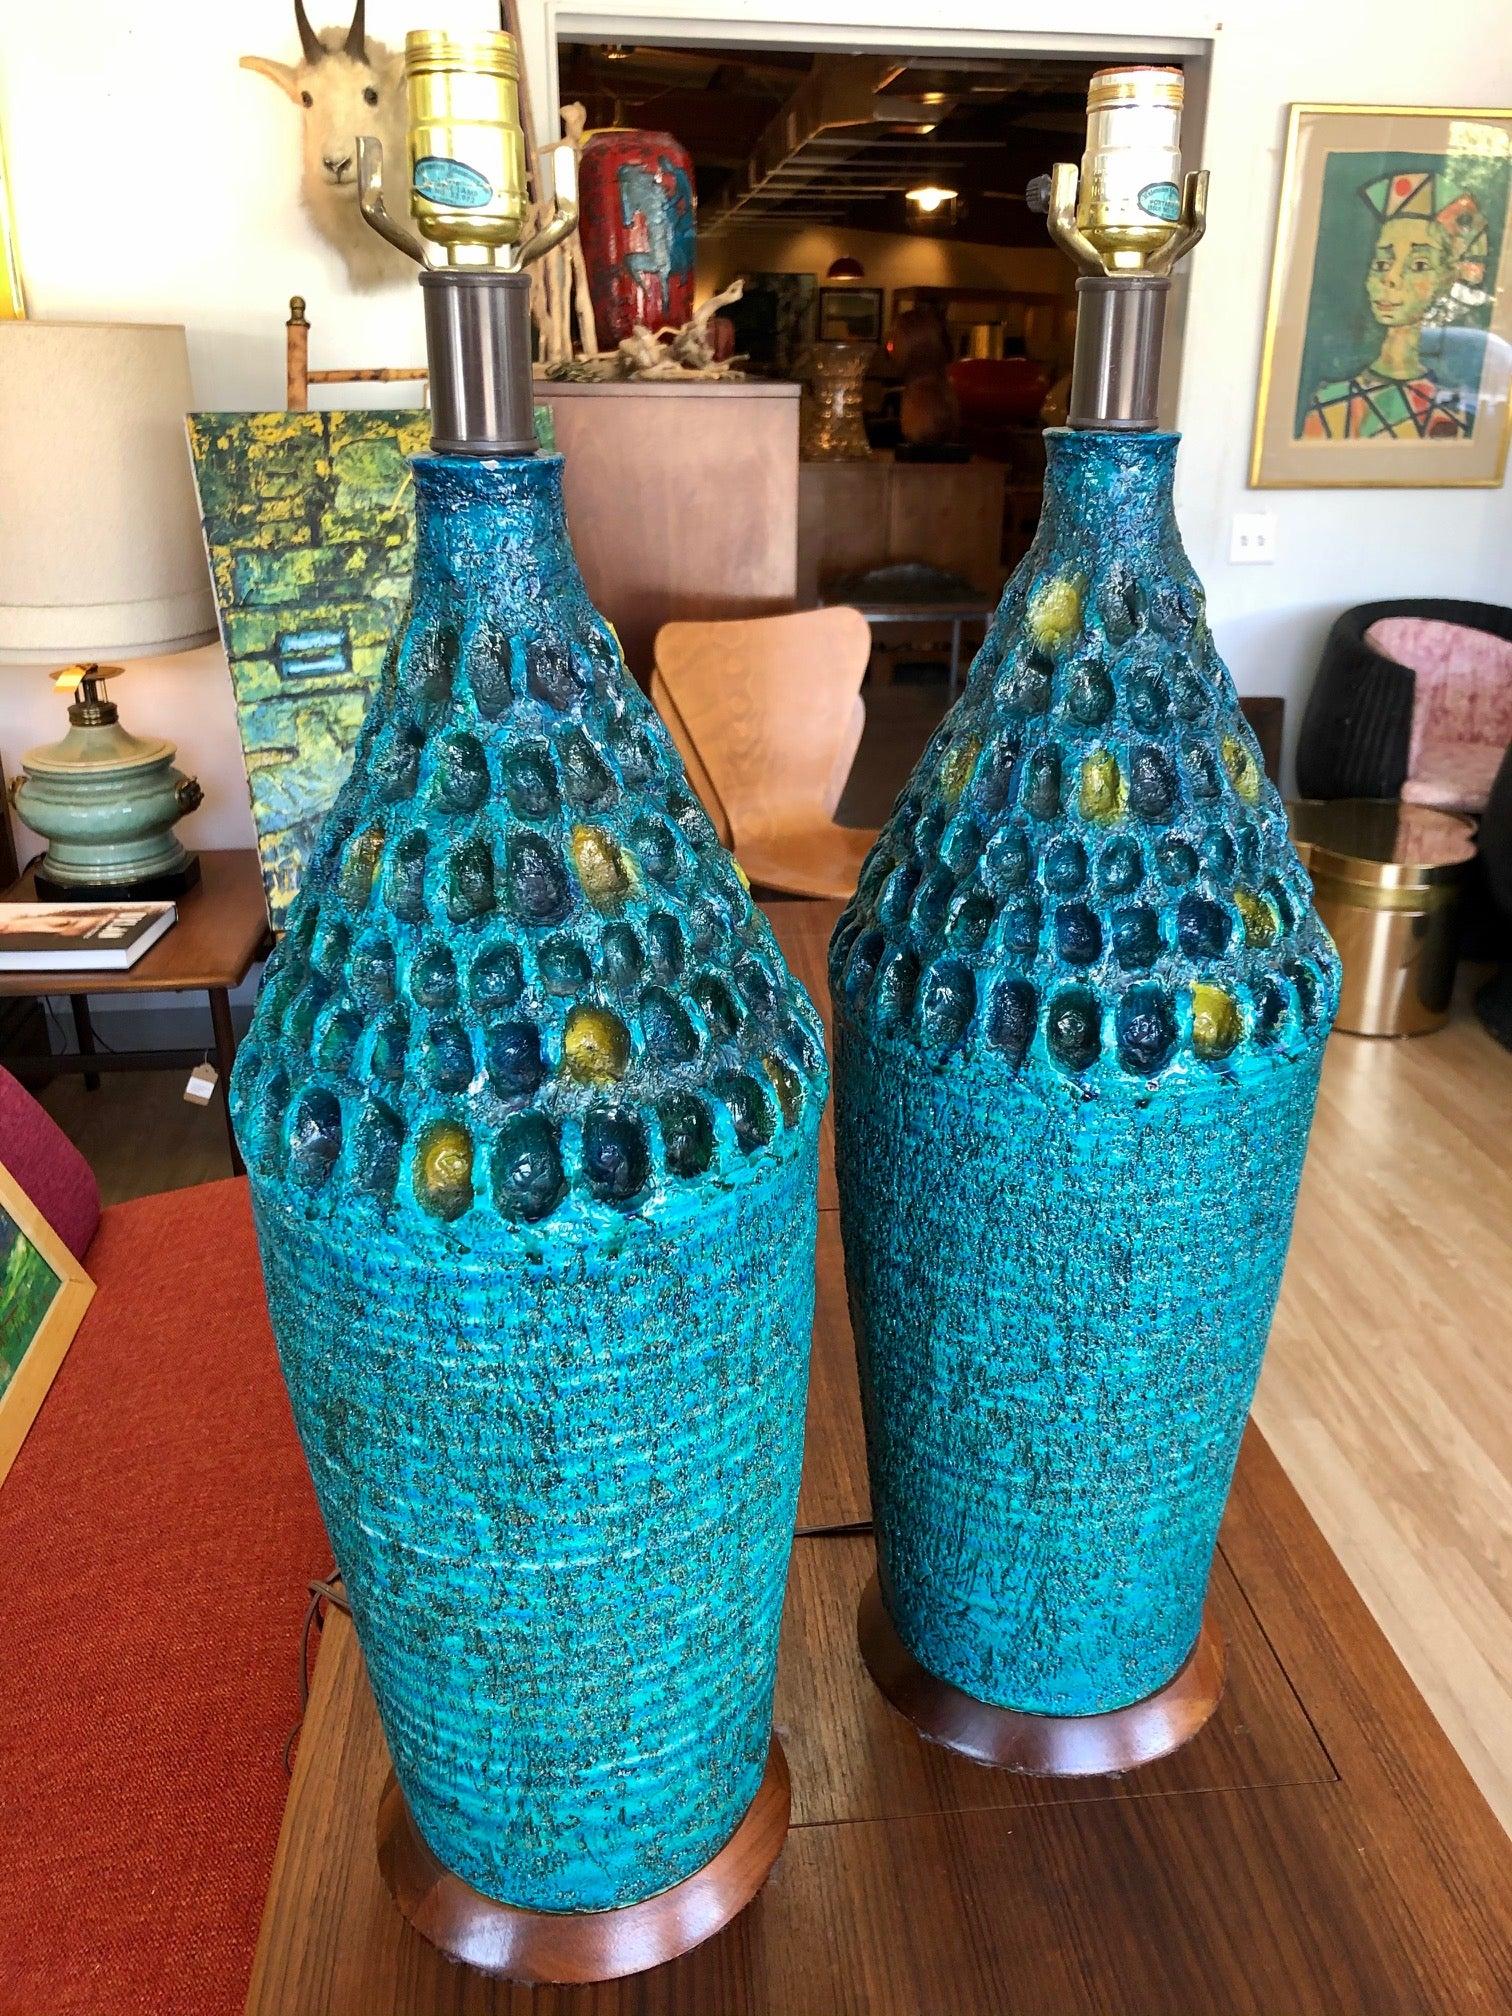 Lamps are in overall good condition. Glazed. Varied hues of blue and splash of yellow-green. Hand-crafted texture. Walnut base.
Unknown artist or maker,
circa 1960s.
Dimensions:
27